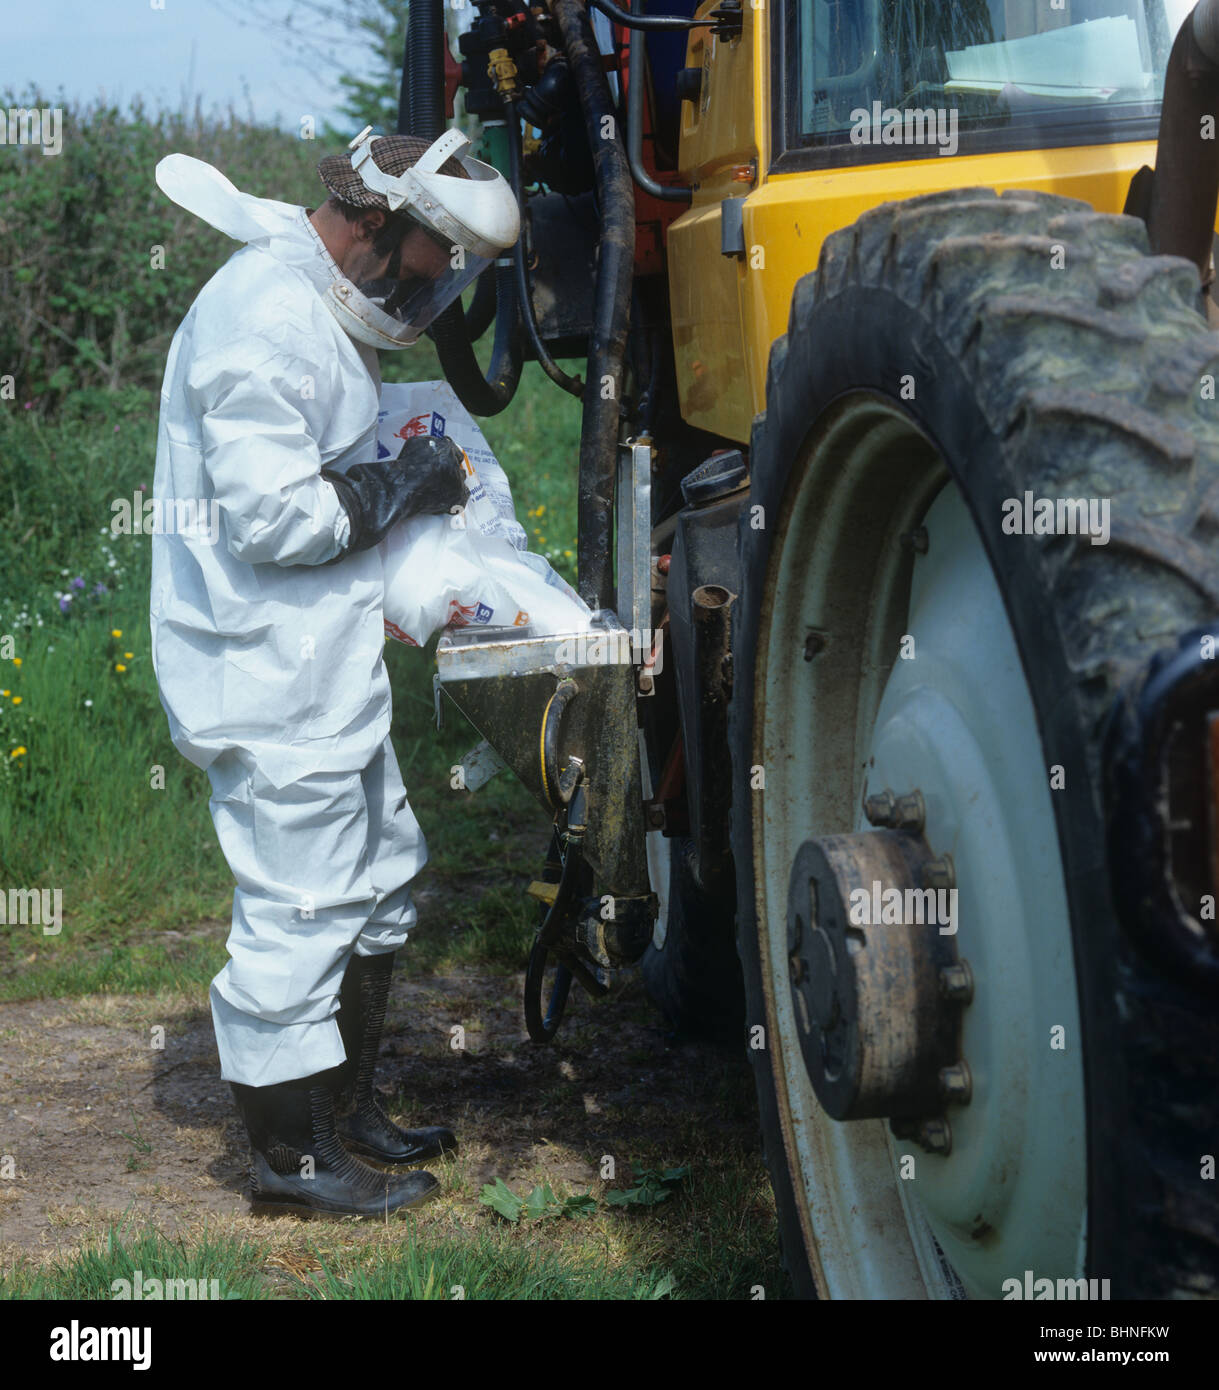 Worker wearing full protective gear filling tank on Gem 2000 sprayer mounted on Fastrac tractor Stock Photo